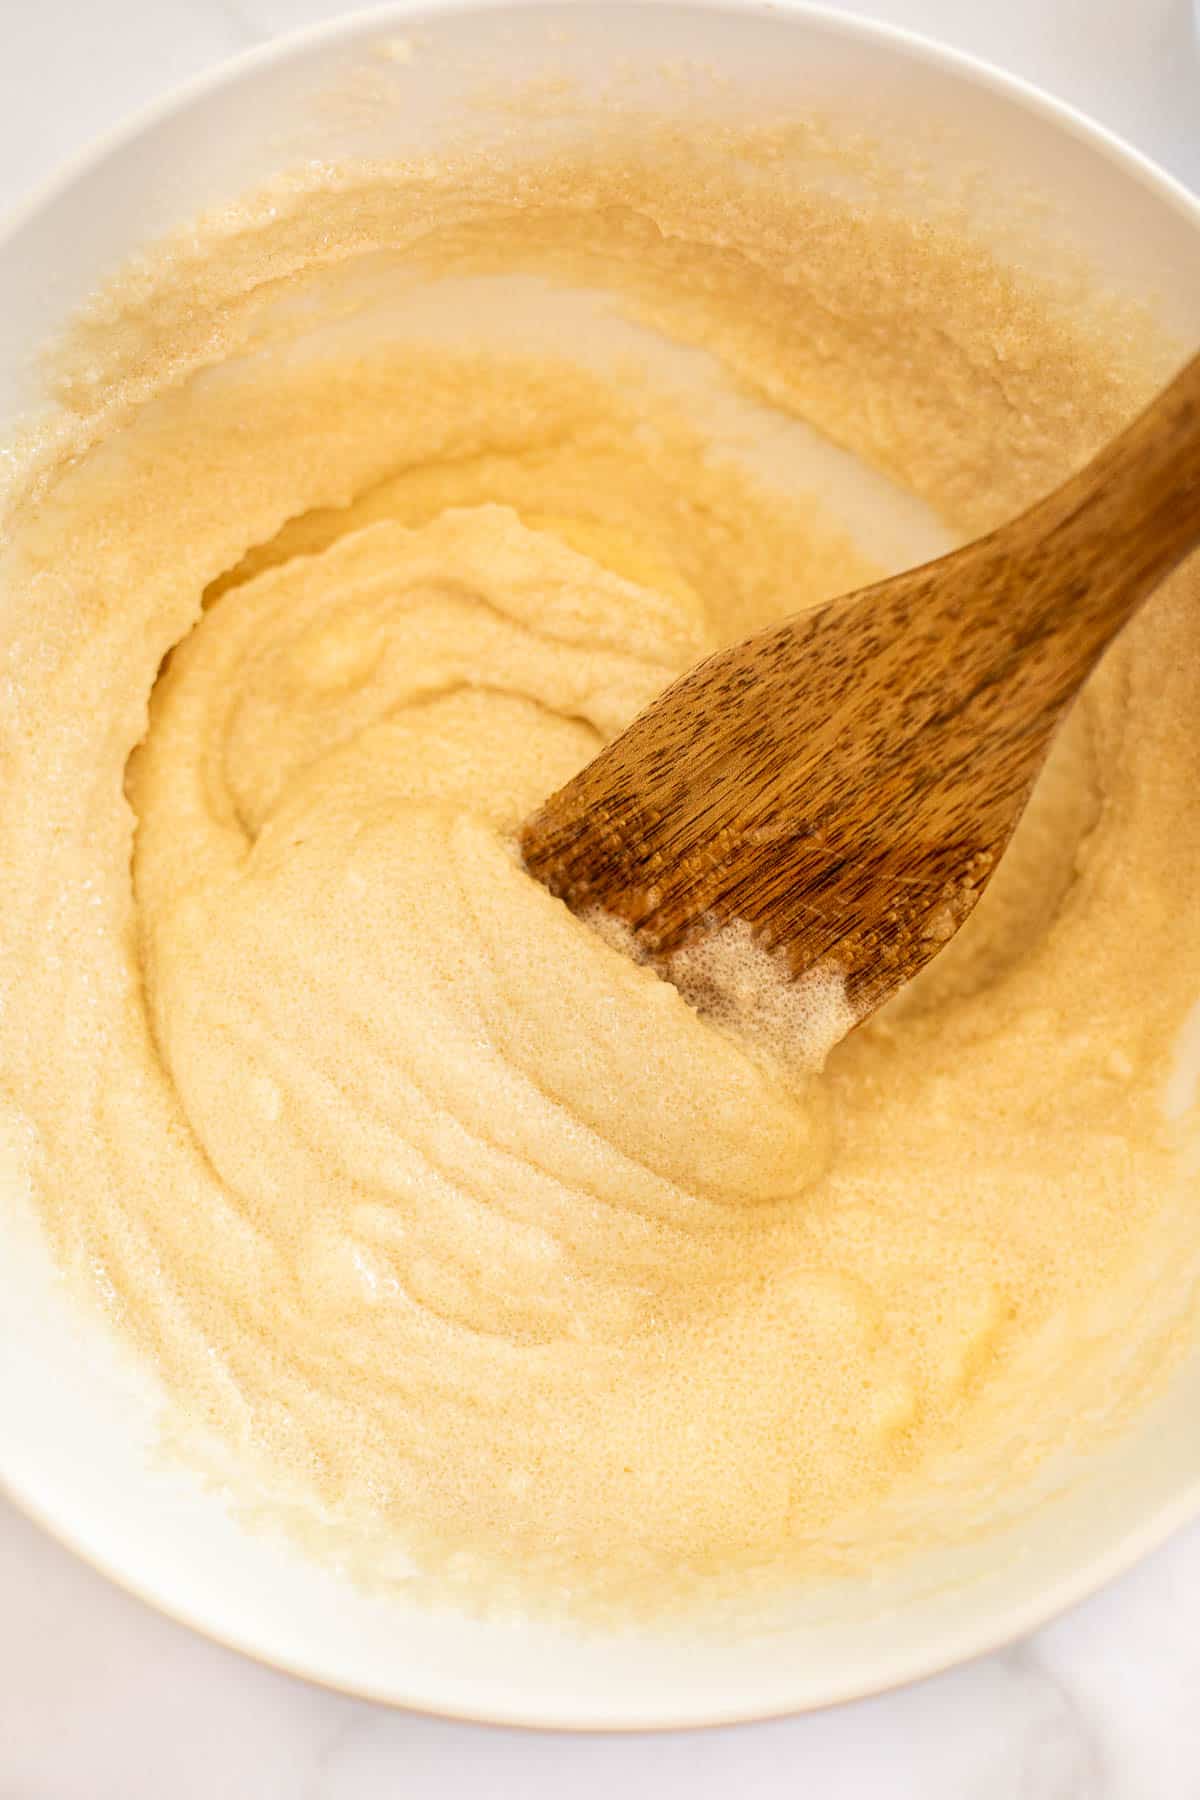 butter, oil, and sugar mixed together in a white bowl.